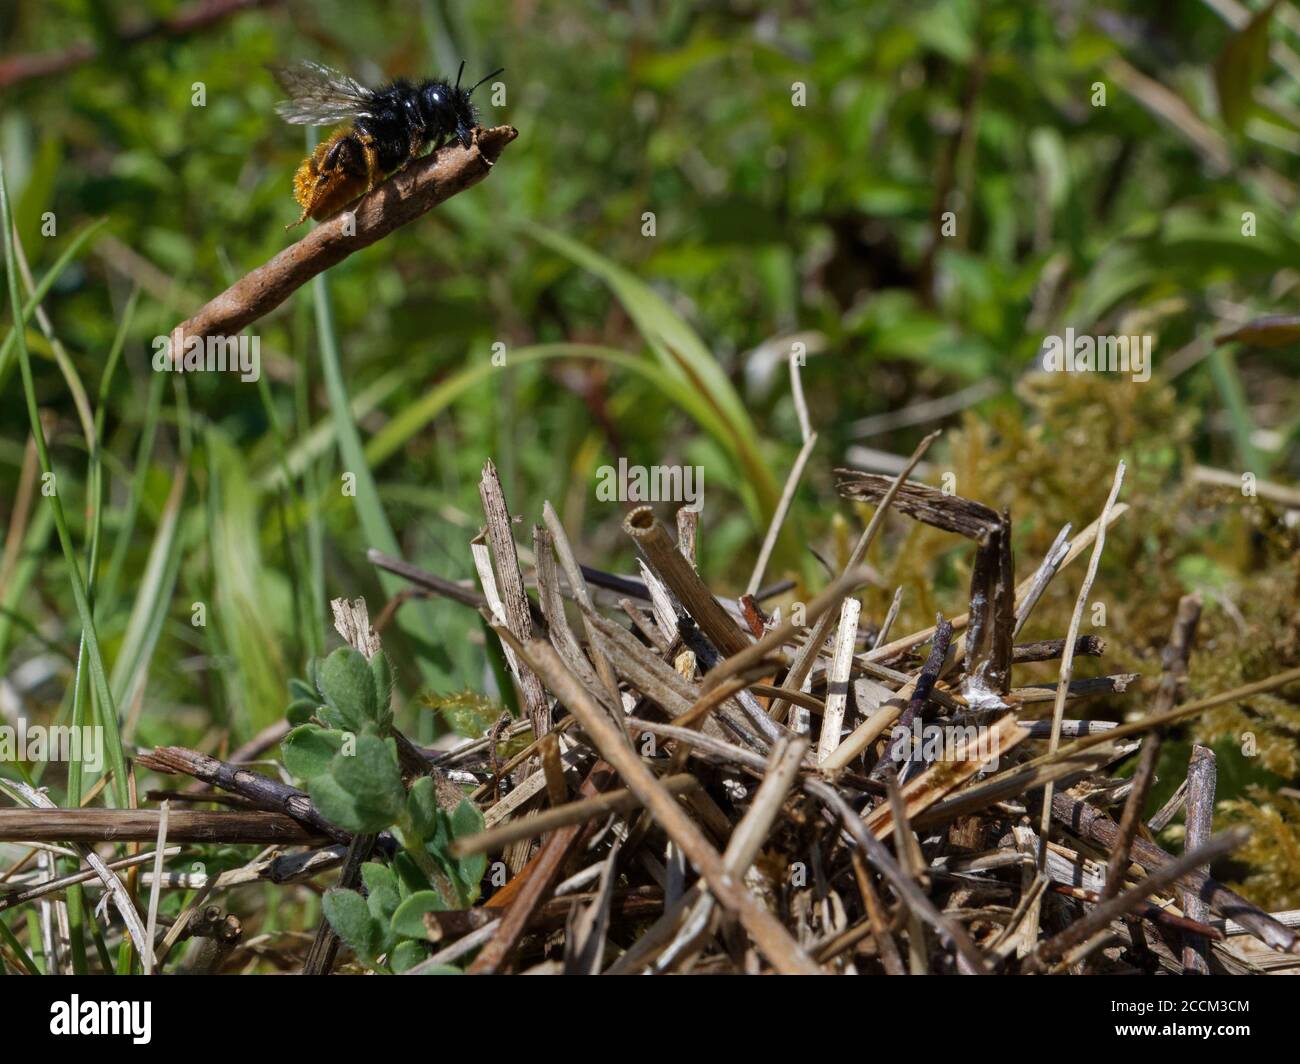 Two-coloured mason bee (Osmia bicolor) flying in with a stick to add to a pile of vegetation camouflaging her nest in a Brown-lipped snail shell, UK. Stock Photo